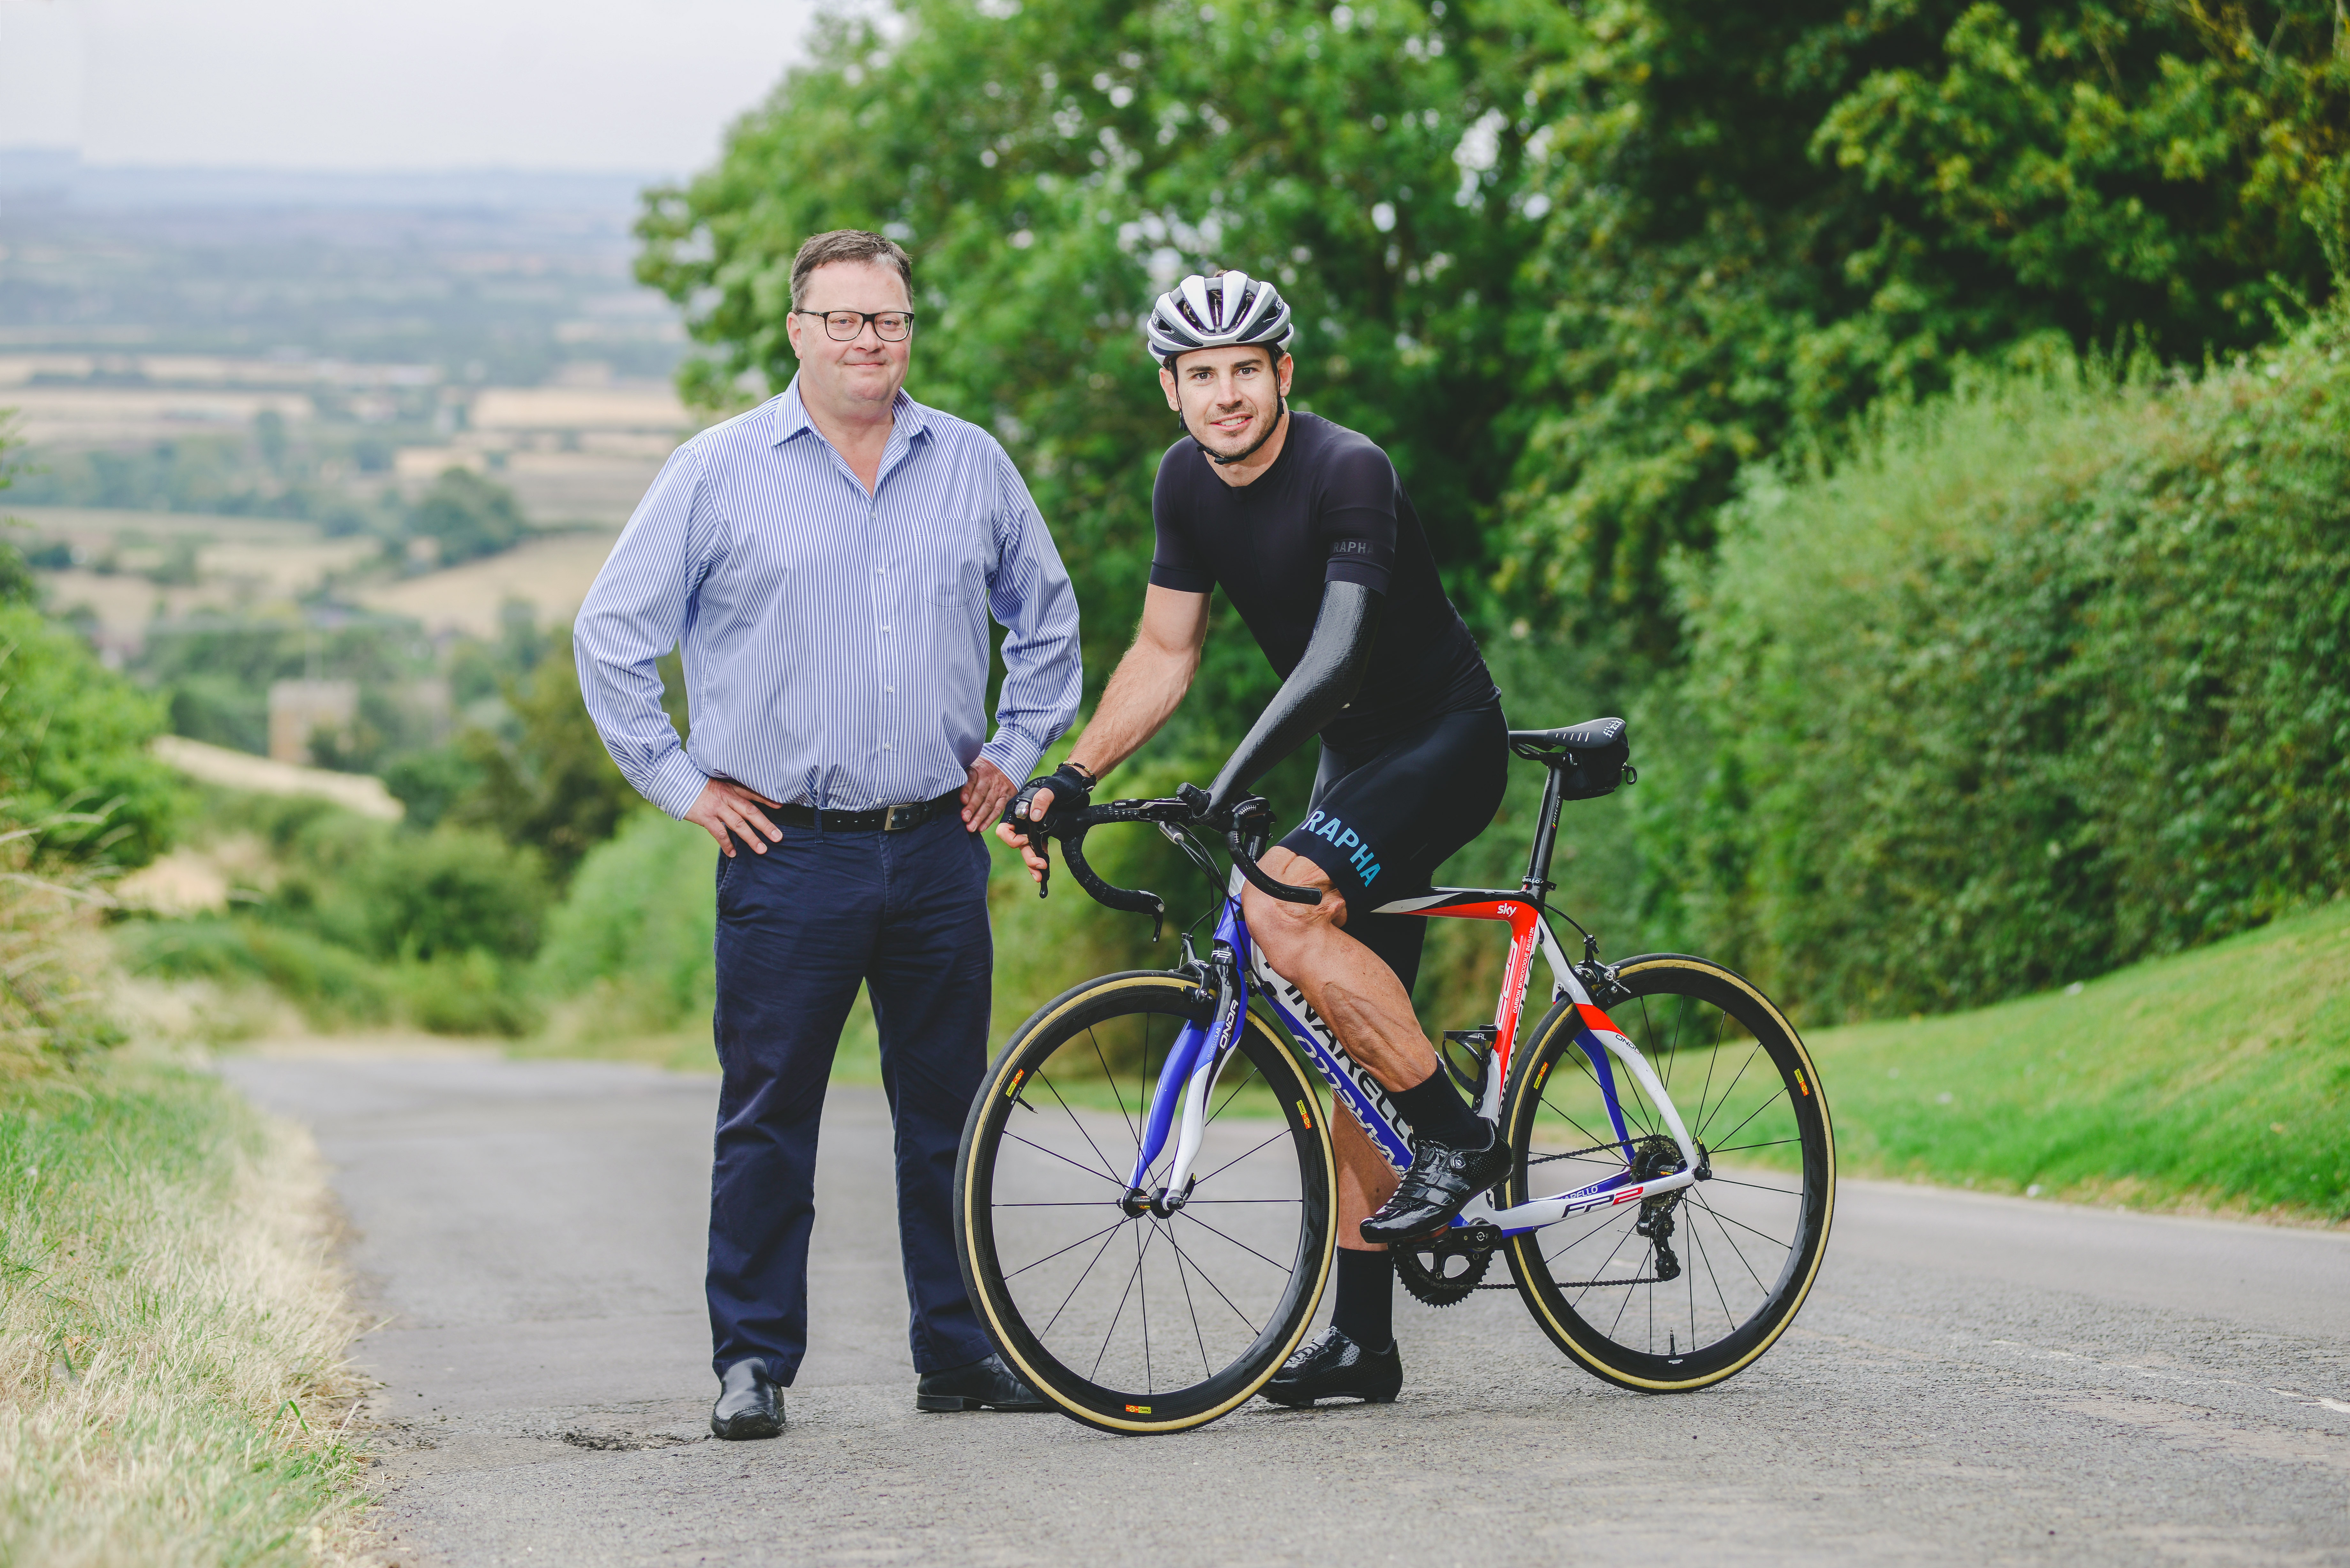 War veteran and champion para-cyclist adds force to company's fund for comrades